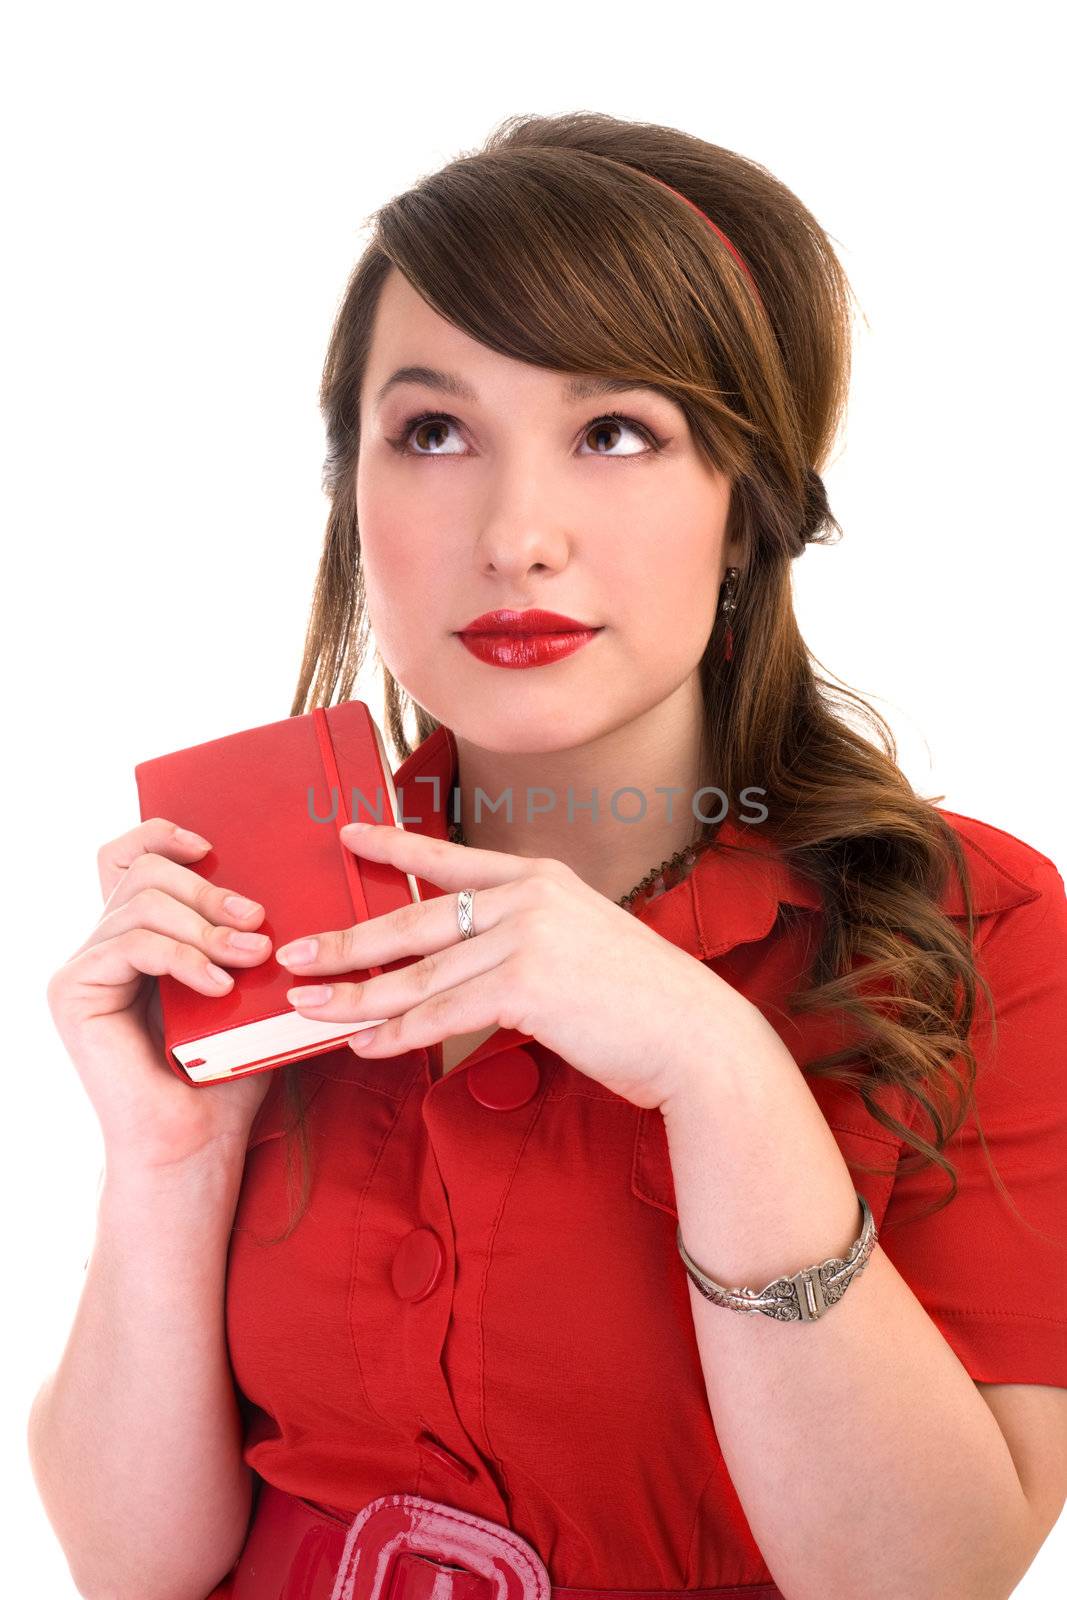 Girl in red dress and her diary by mihhailov